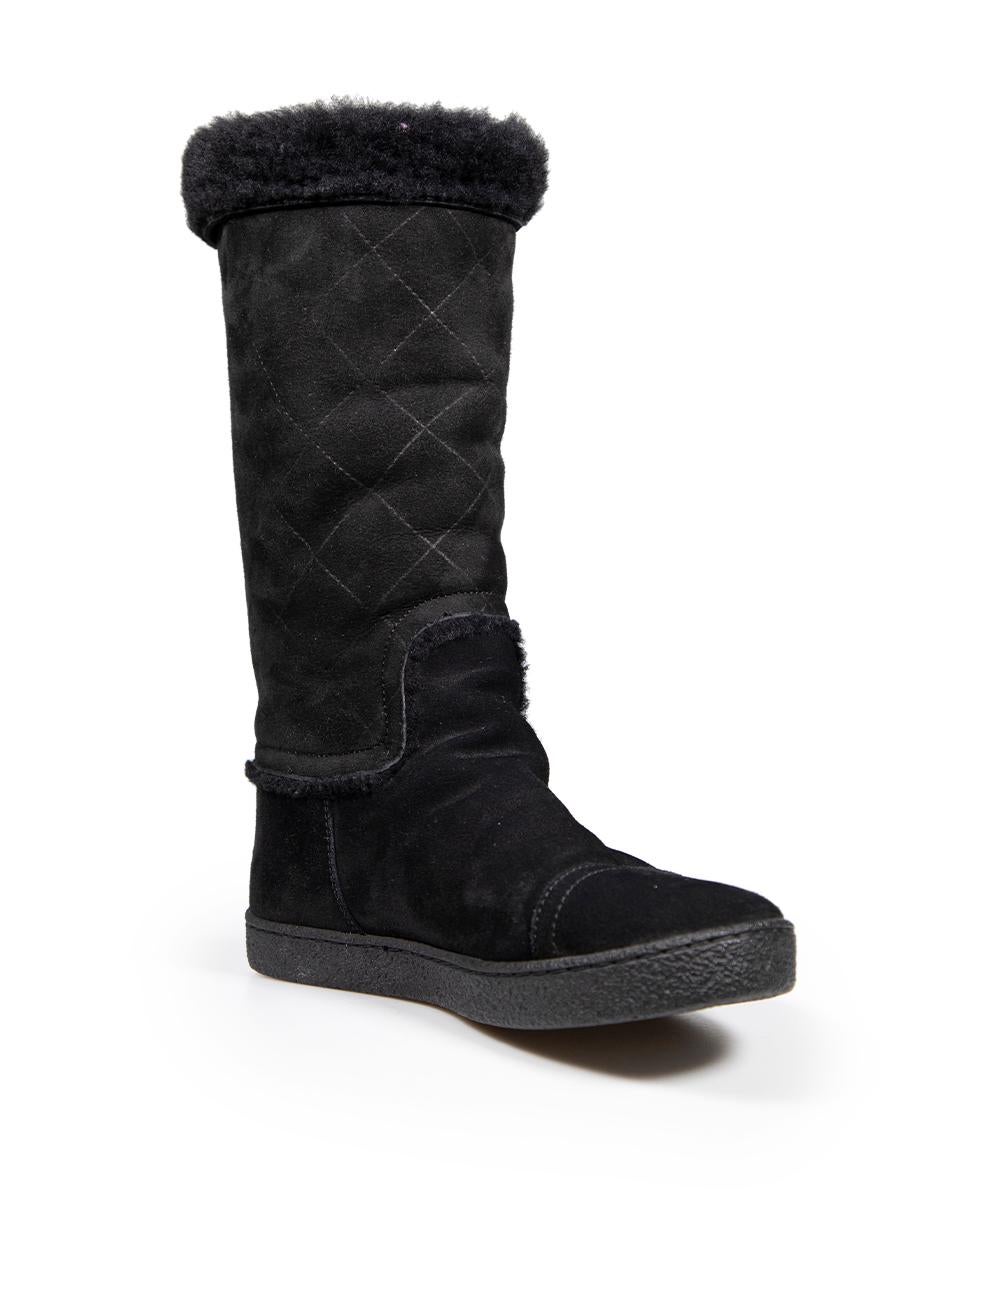 CONDITION is Very good. Minimal wear to boots is evident. Minimal wear to the left-side of the left boot and the right-side of the right boot, as well as the heels of both with light abrasions to the suede on this used Chanel designer resale item.
